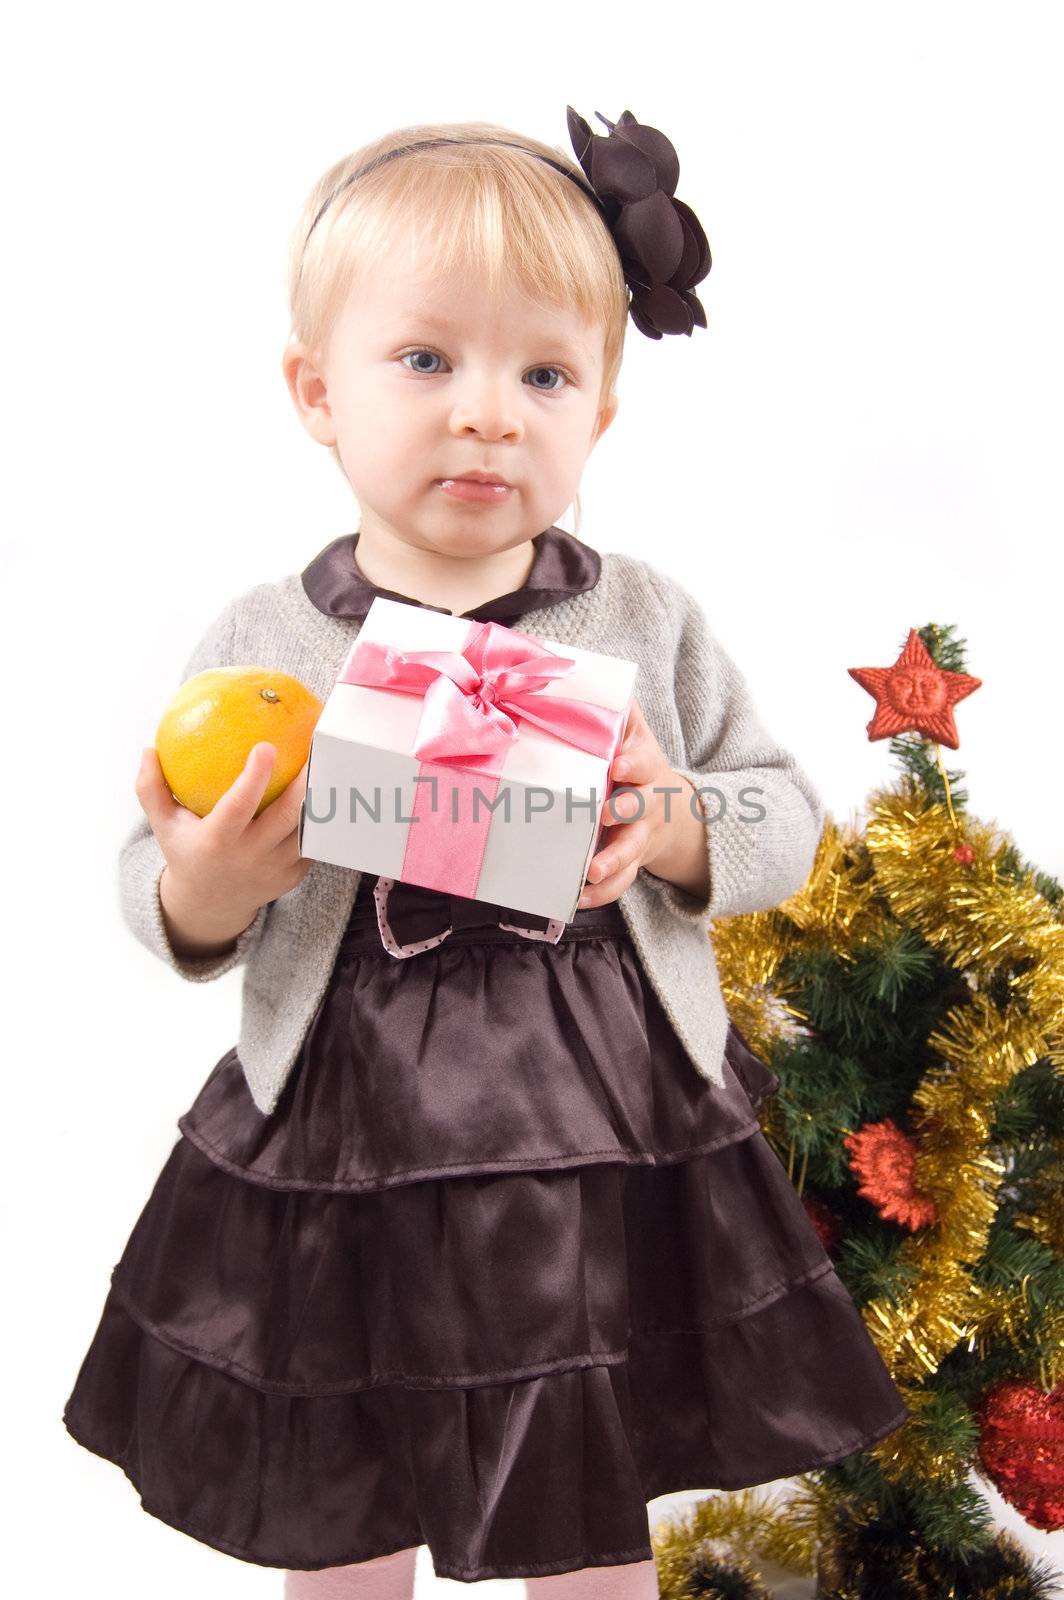 Little girl with Christmas tree and gifts by Angel_a